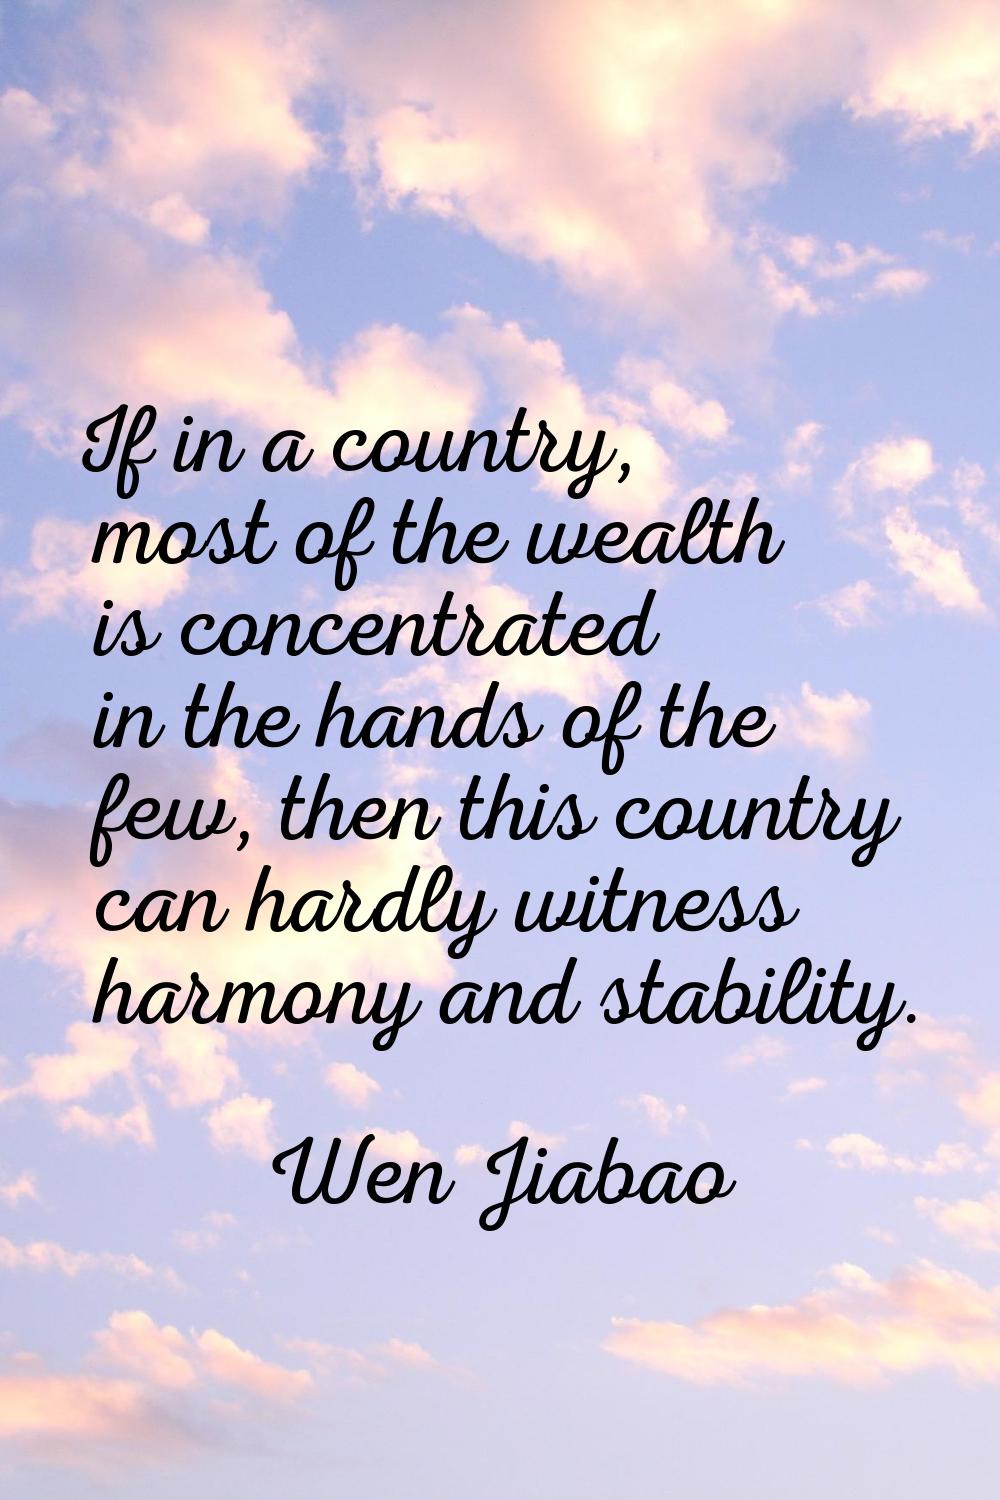 If in a country, most of the wealth is concentrated in the hands of the few, then this country can 